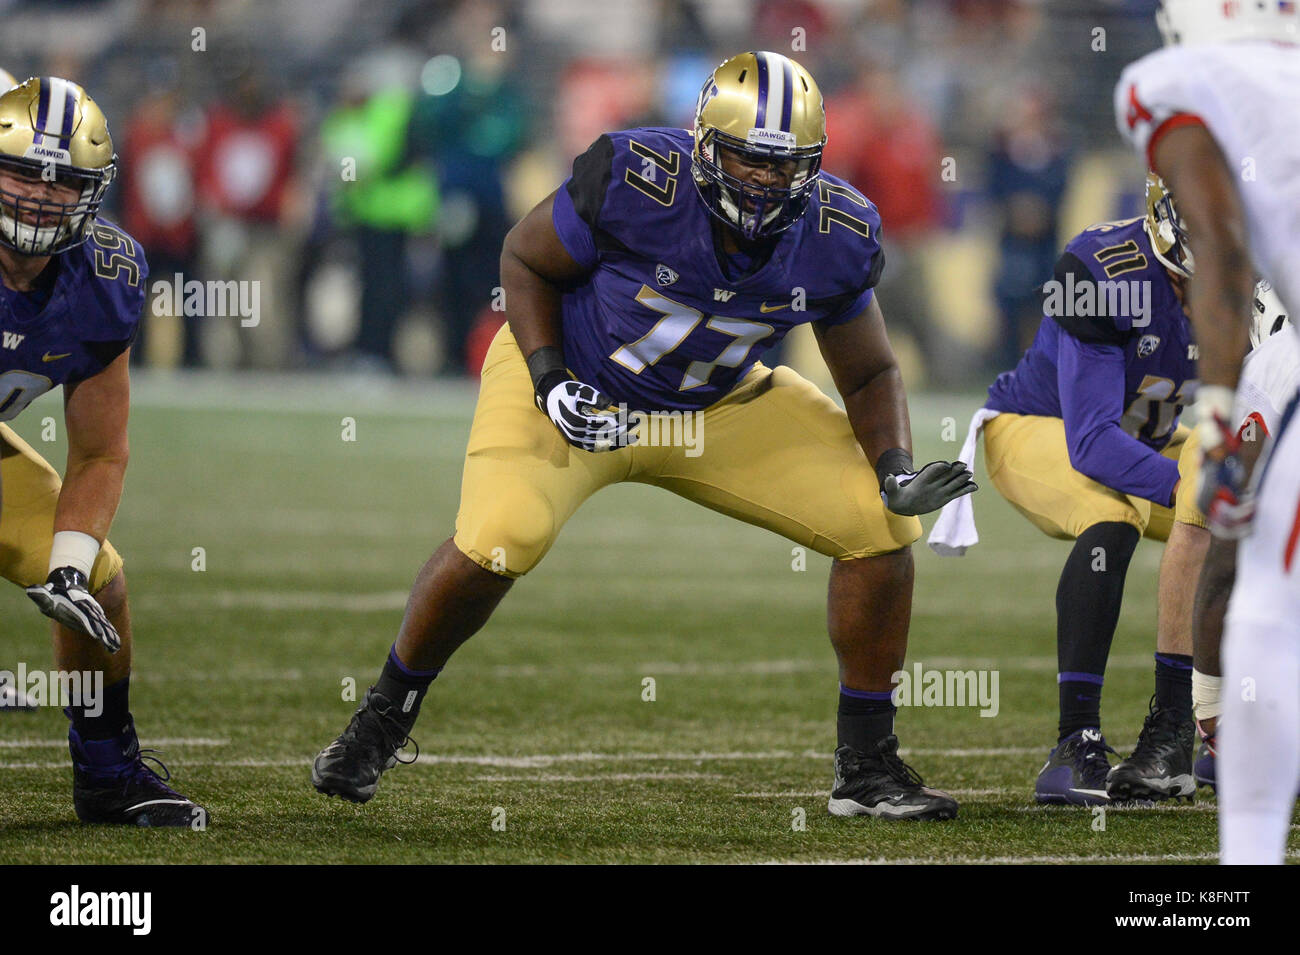 Seattle, WA, USA. 16th Sep, 2017. UW offensive tackle Devin Burleson (77) in action during a NCAA football game between the Fresno State Bulldogs and the Washington Huskies. The game was played at Husky Stadium in Seattle, WA. Jeff Halstead/CSM/Alamy Live News Stock Photo